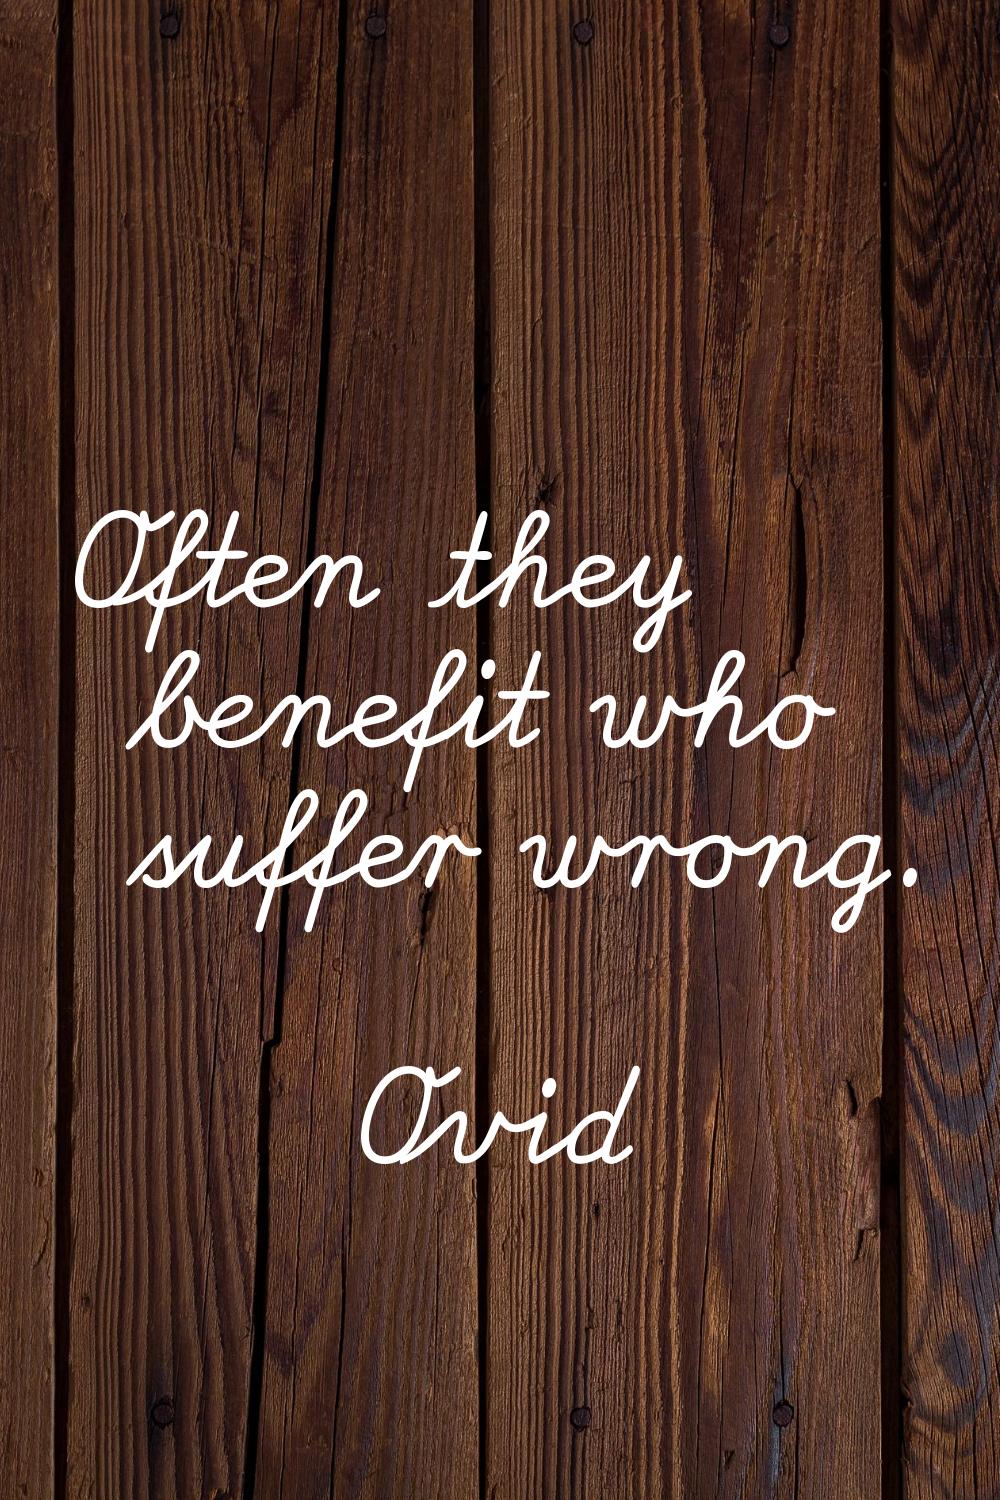 Often they benefit who suffer wrong.